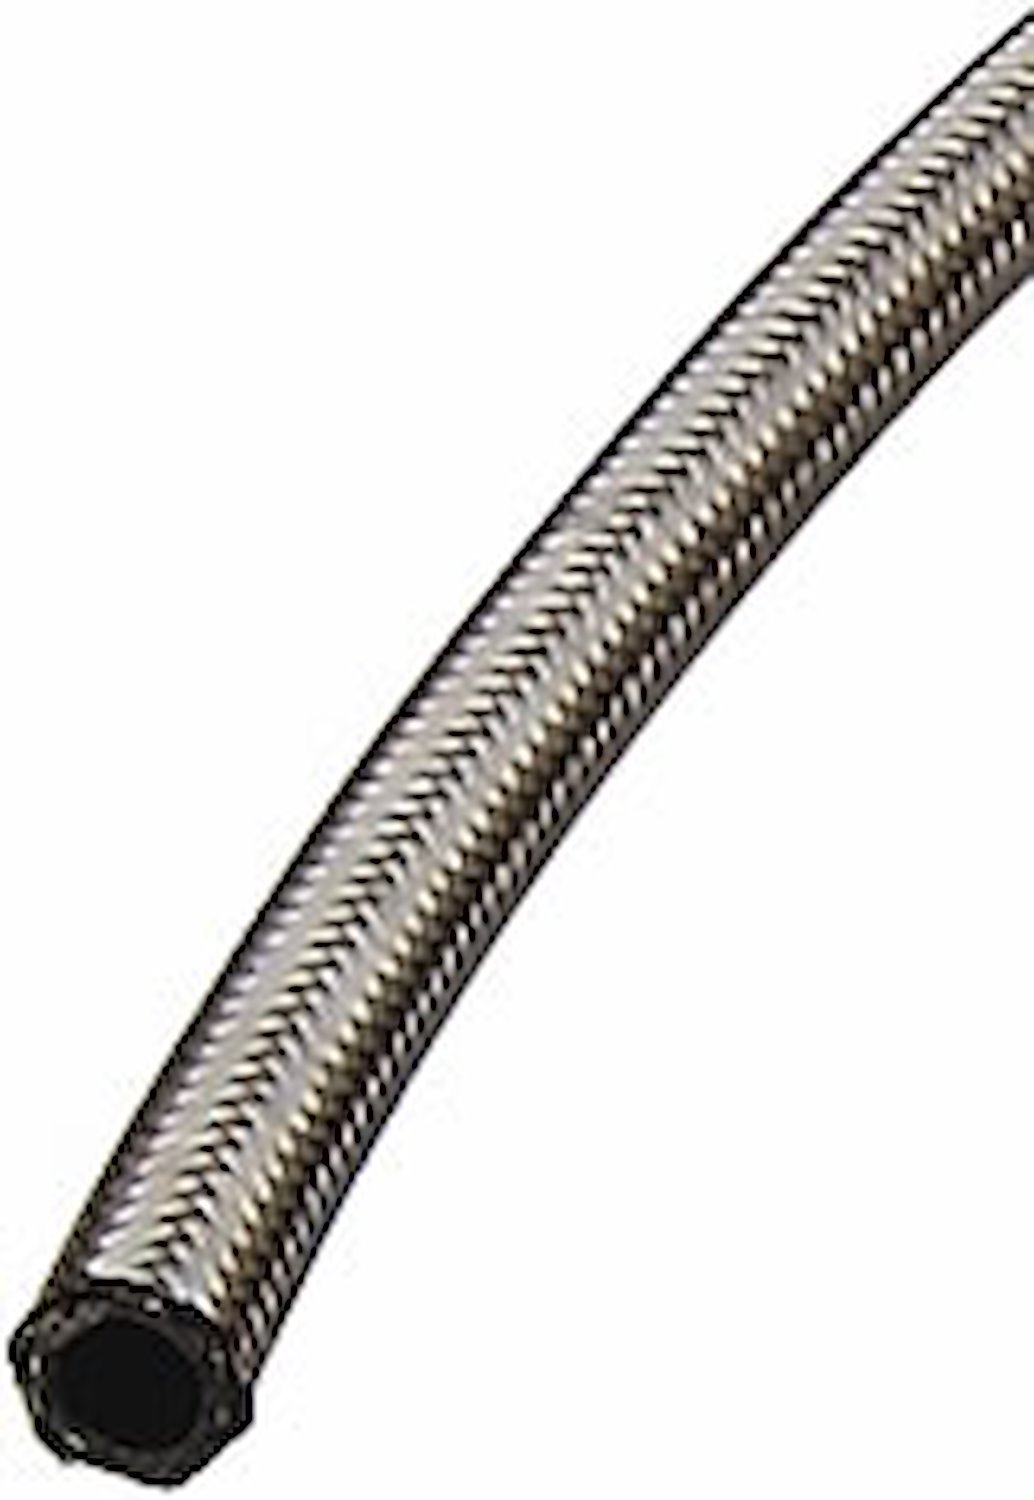 Pro-Flo 200 Series Stainless Steel Braided Hose -08 AN [10 ft.]